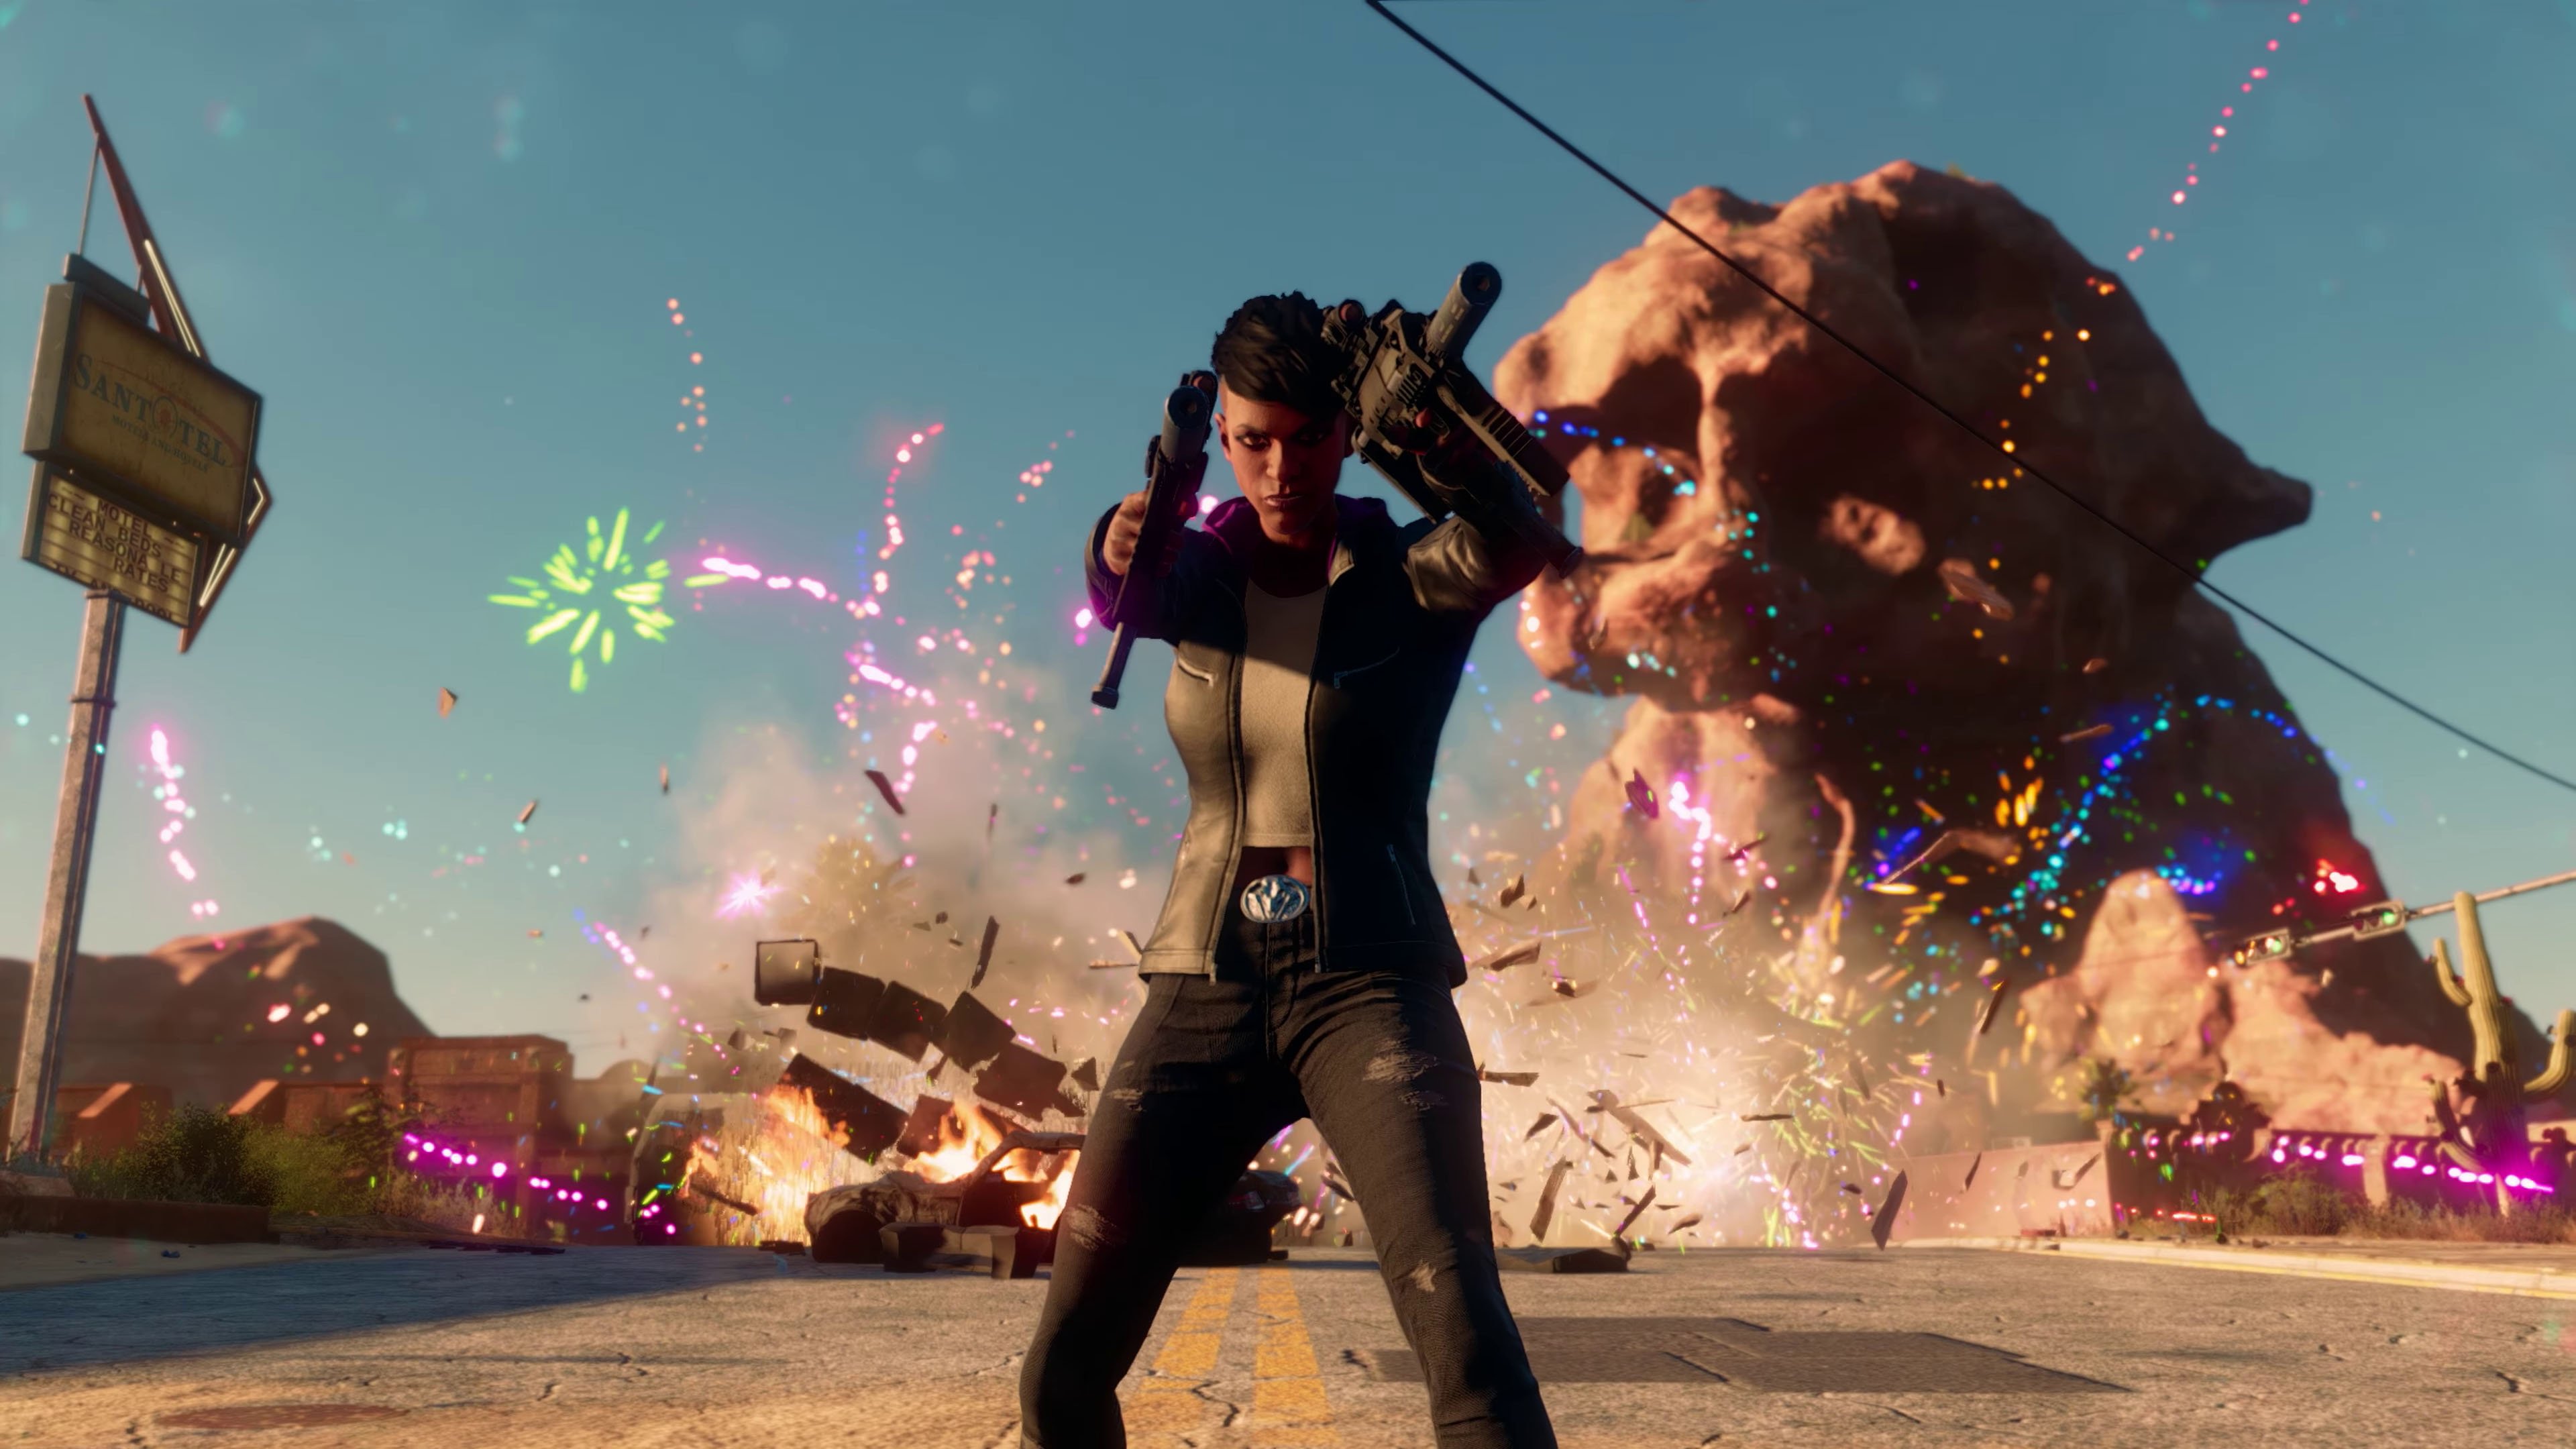 Saints Row reboot trailer, release date, gameplay and more